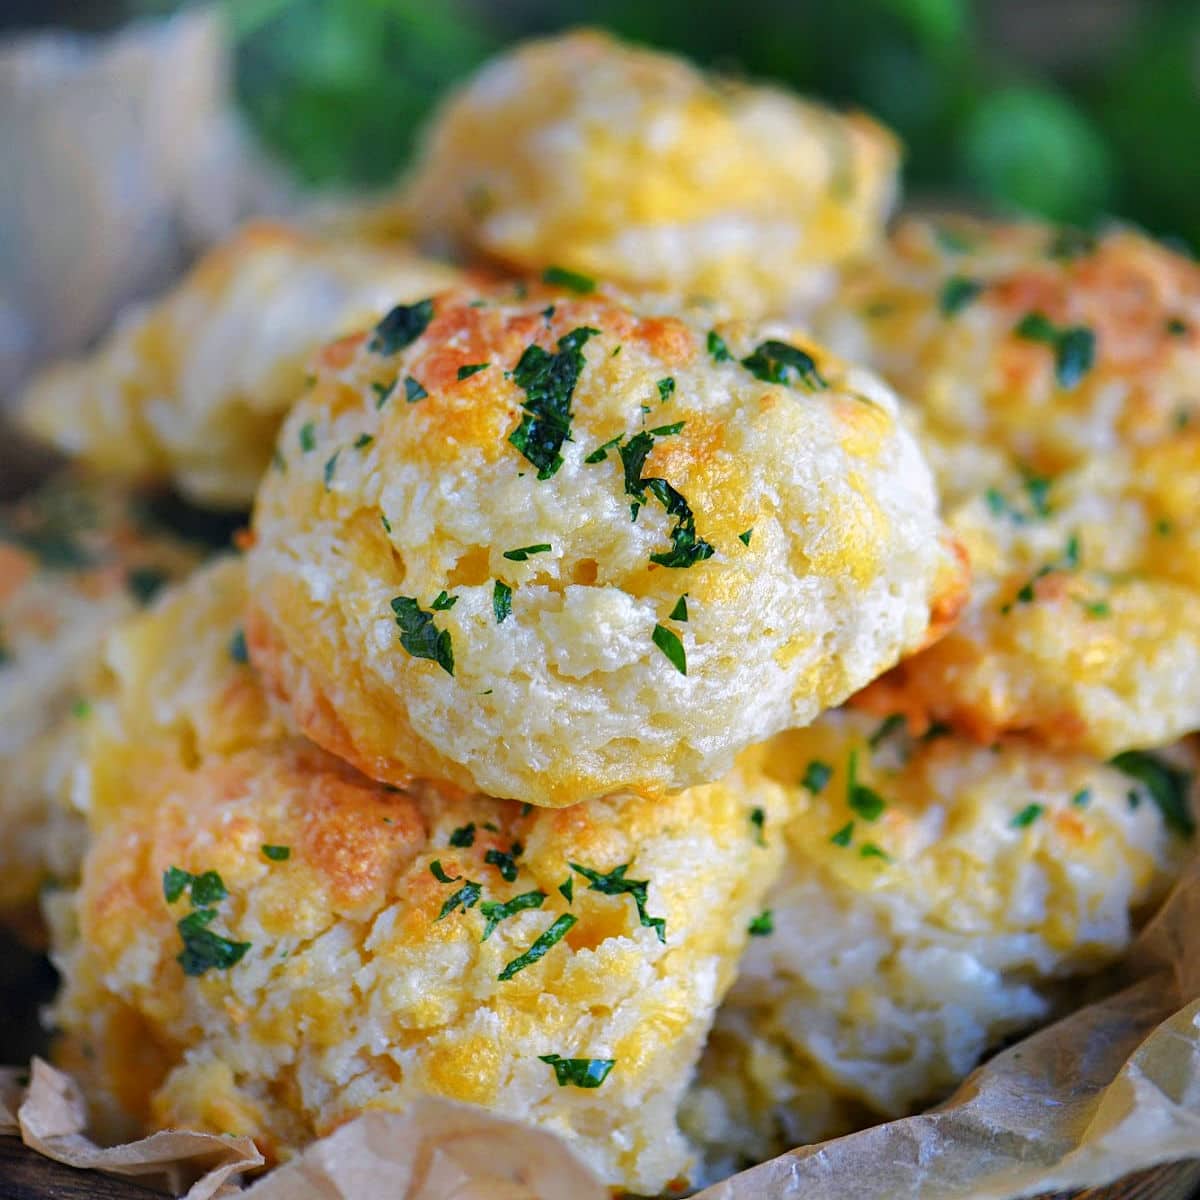 https://www.momontimeout.com/wp-content/uploads/2017/03/cheddar-bay-biscuits-square.jpeg